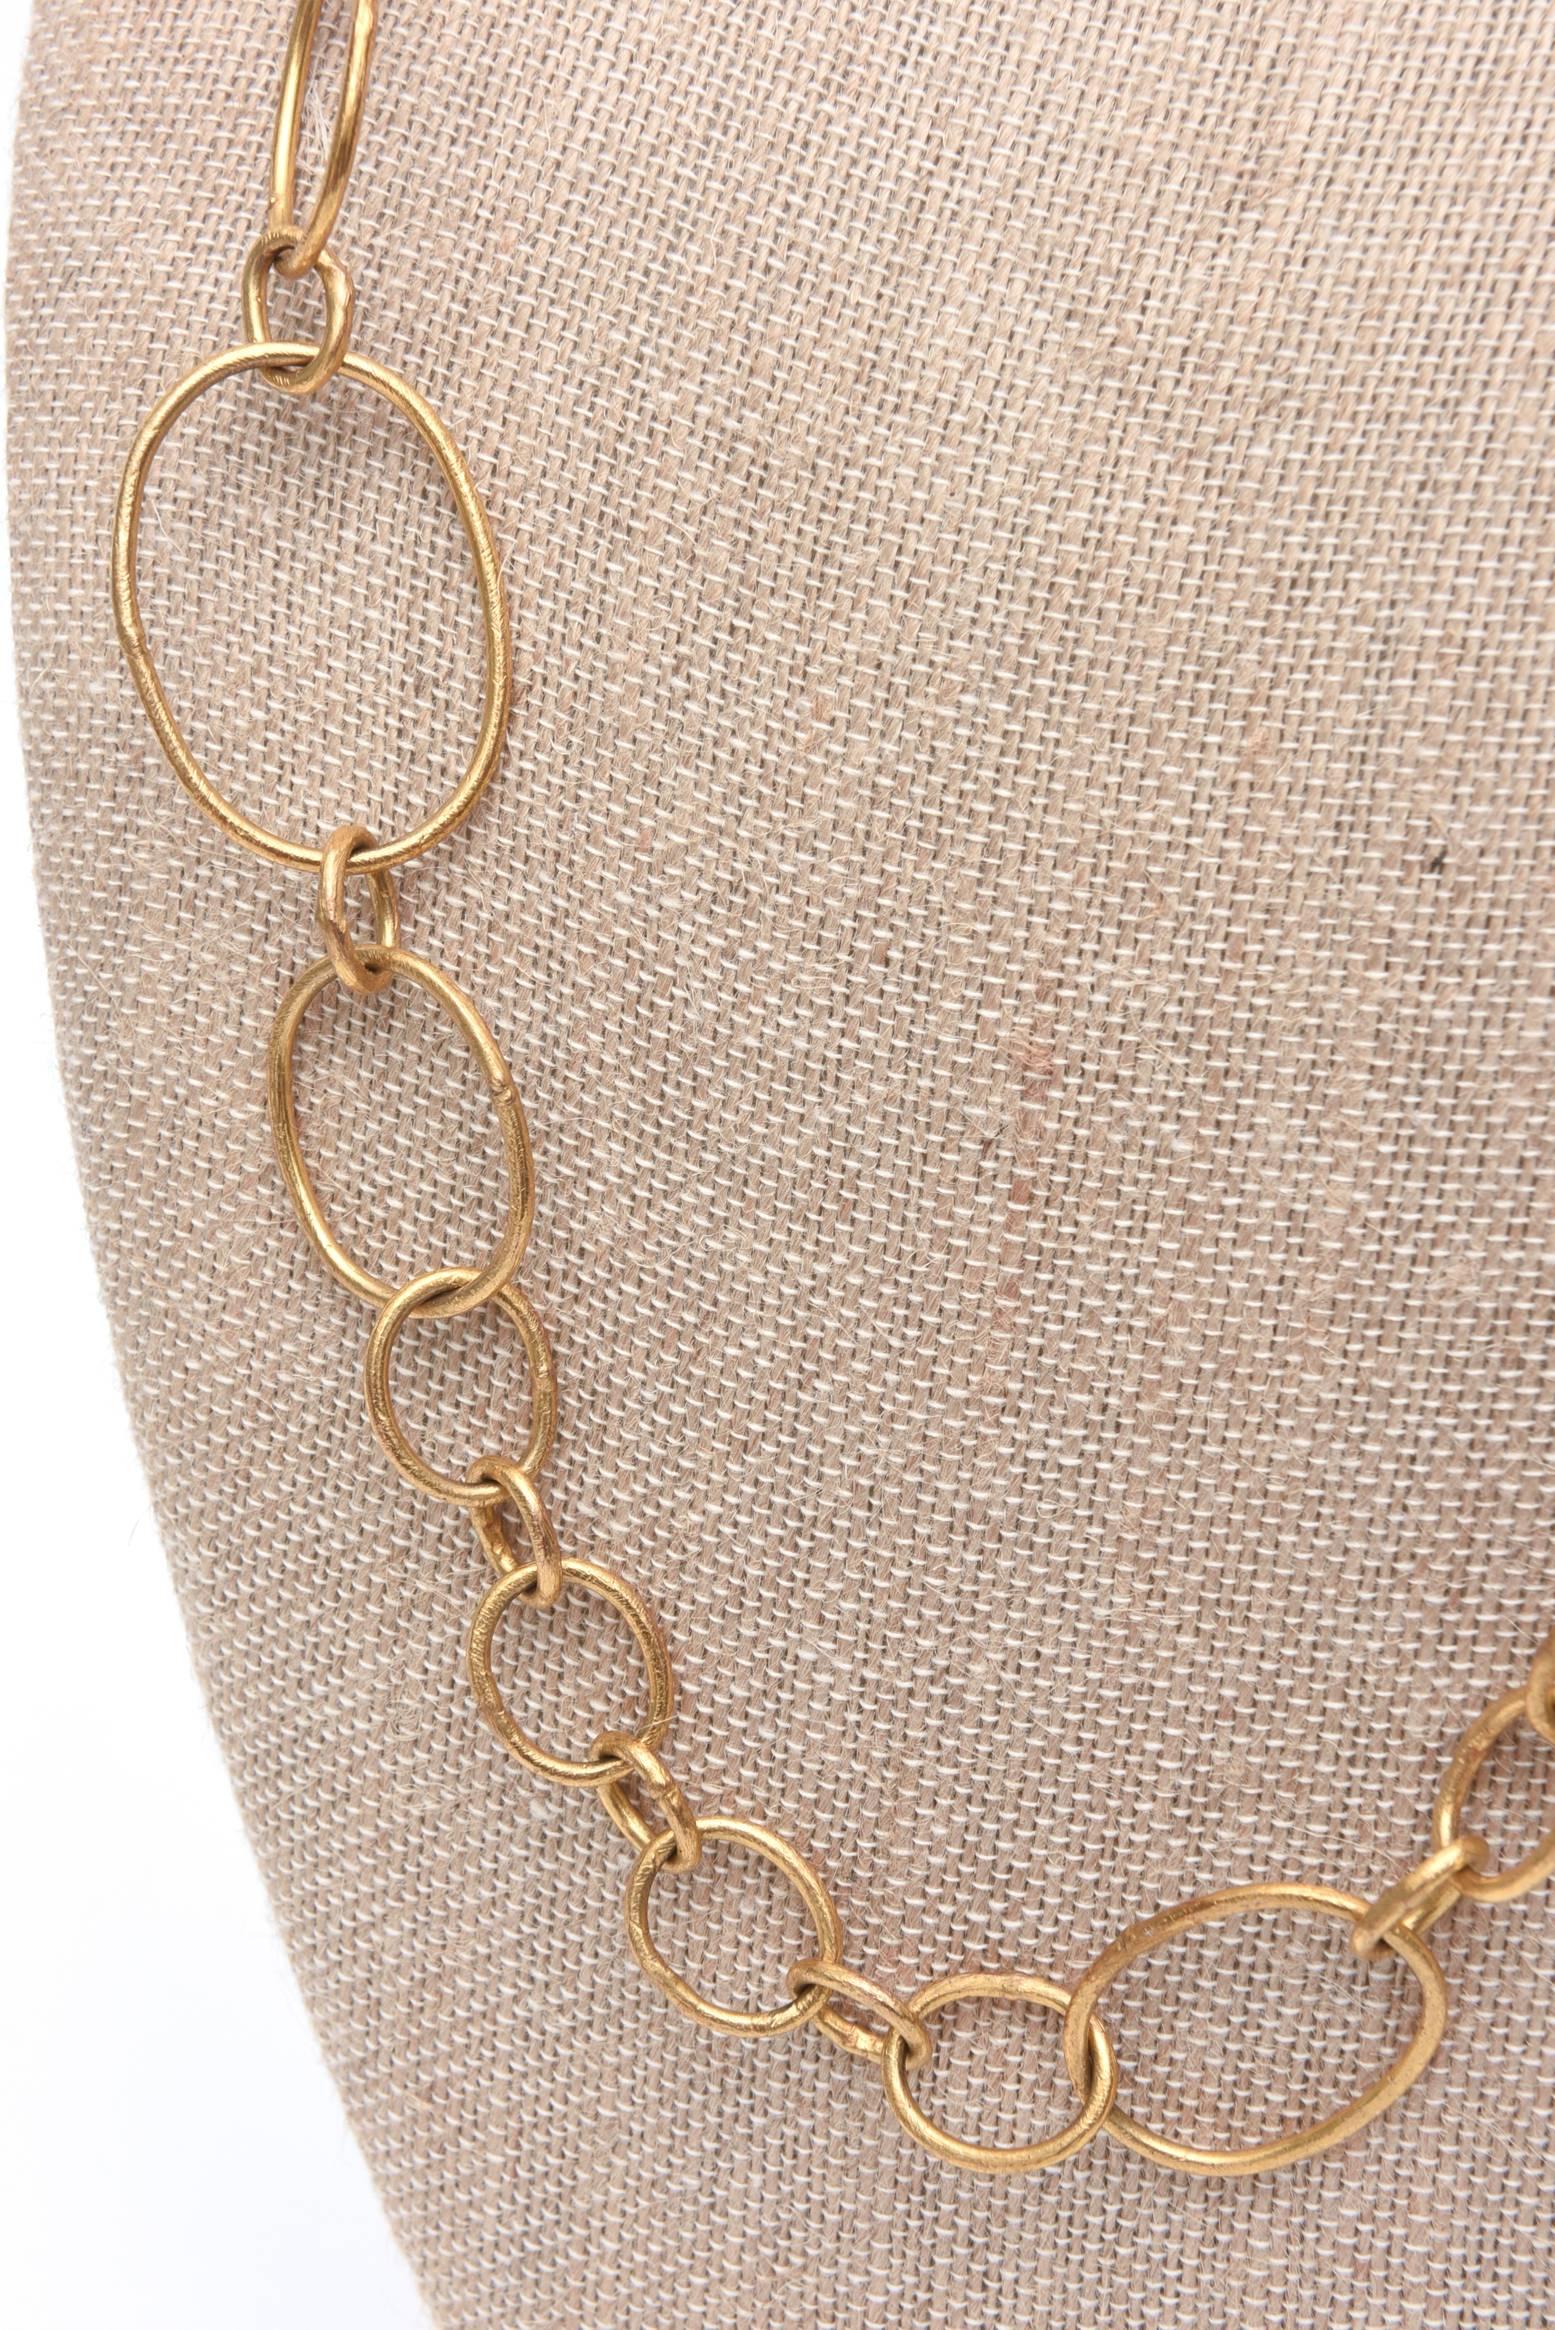 Alexis Bittar Link Chain Necklace For Sale 1